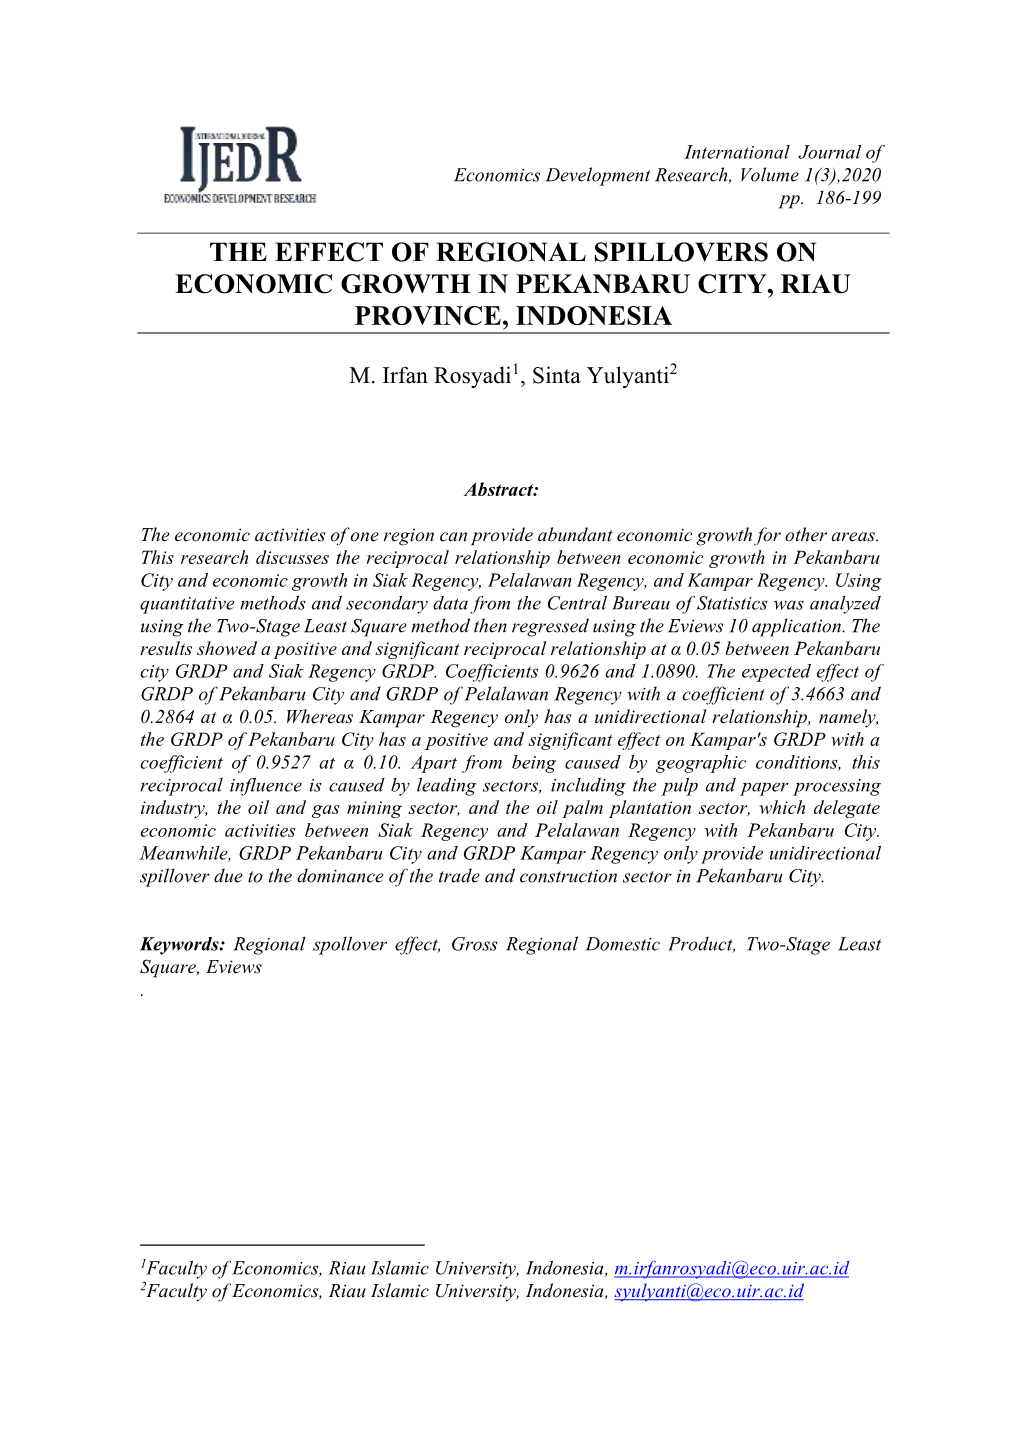 The Effect of Regional Spillovers on Economic Growth in Pekanbaru City, Riau Province, Indonesia